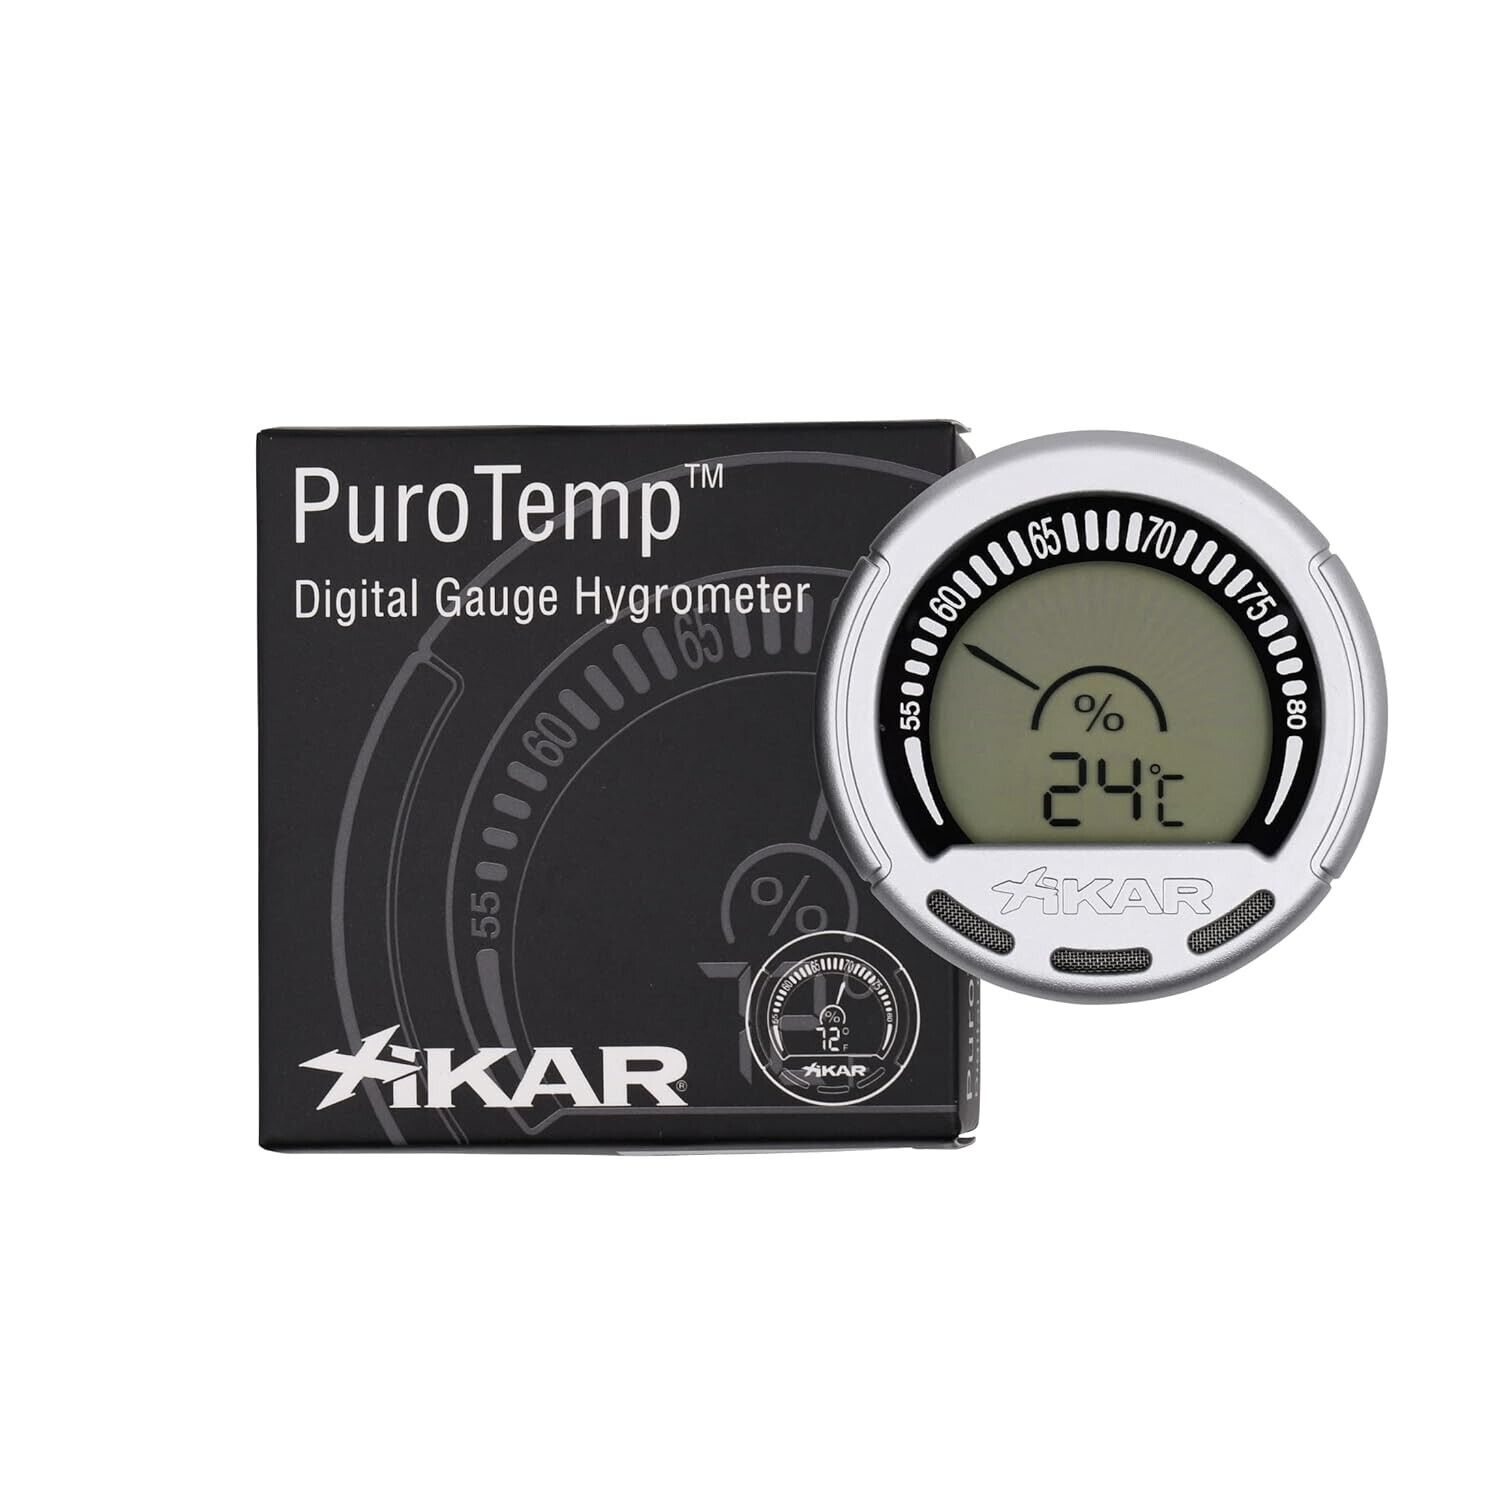 Xikar Purotemp Digital Gauge Hygrometer, Accurate Right Out of The Box